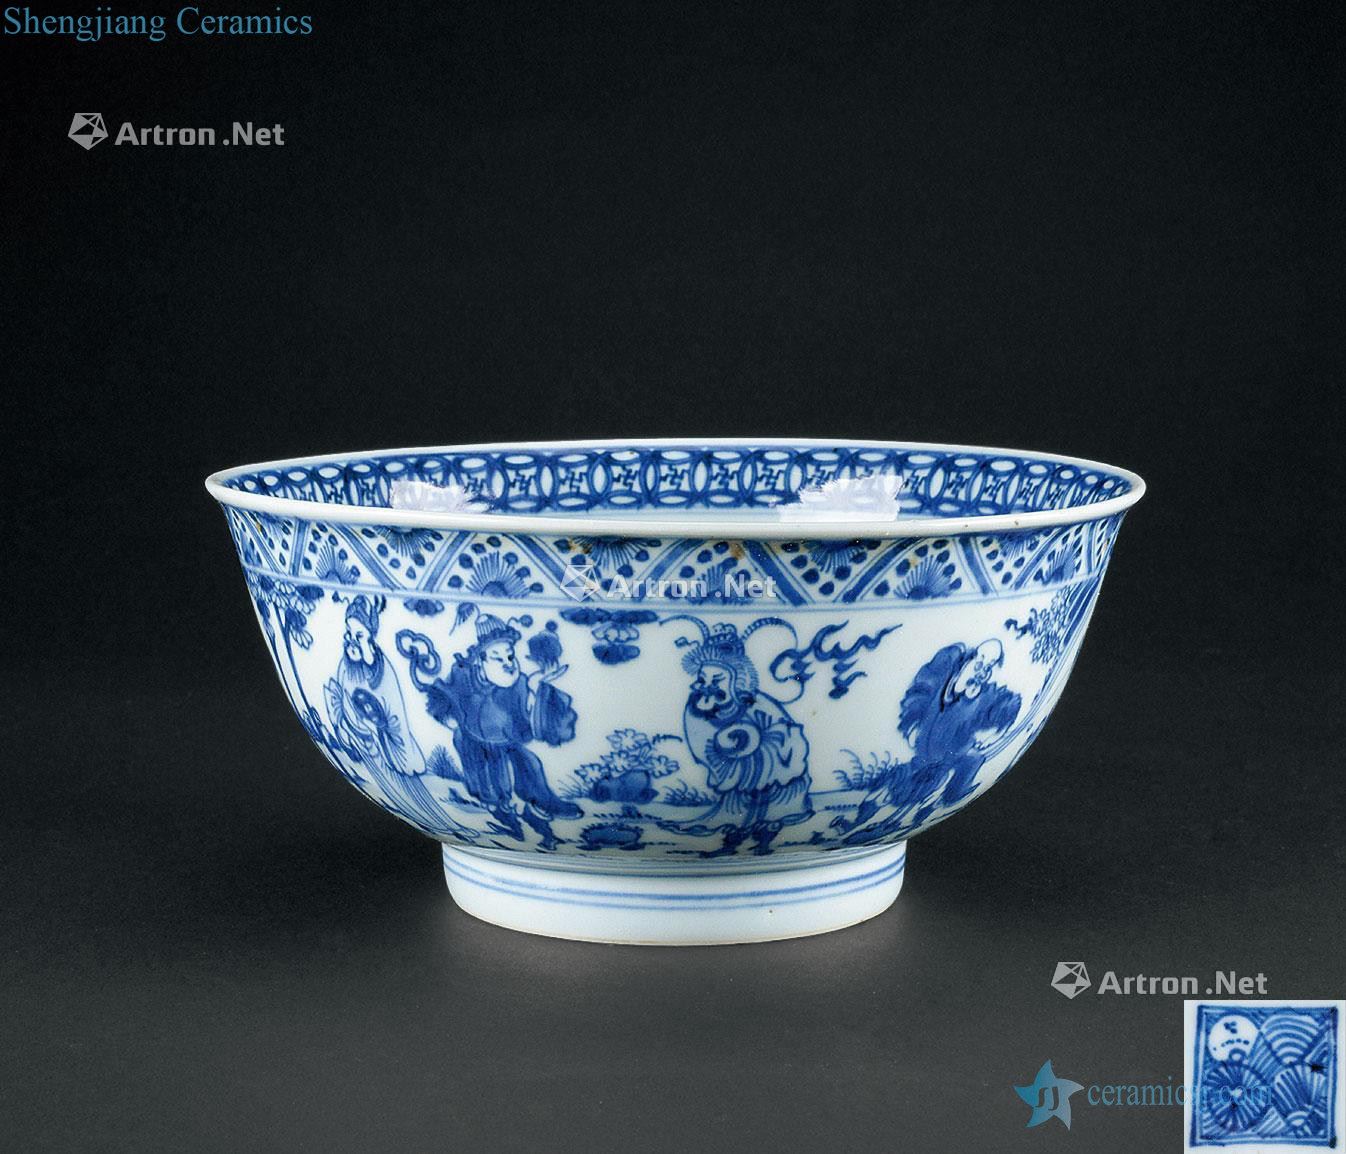 In the qing dynasty (1644-1911) blue and white dragon bowl character story